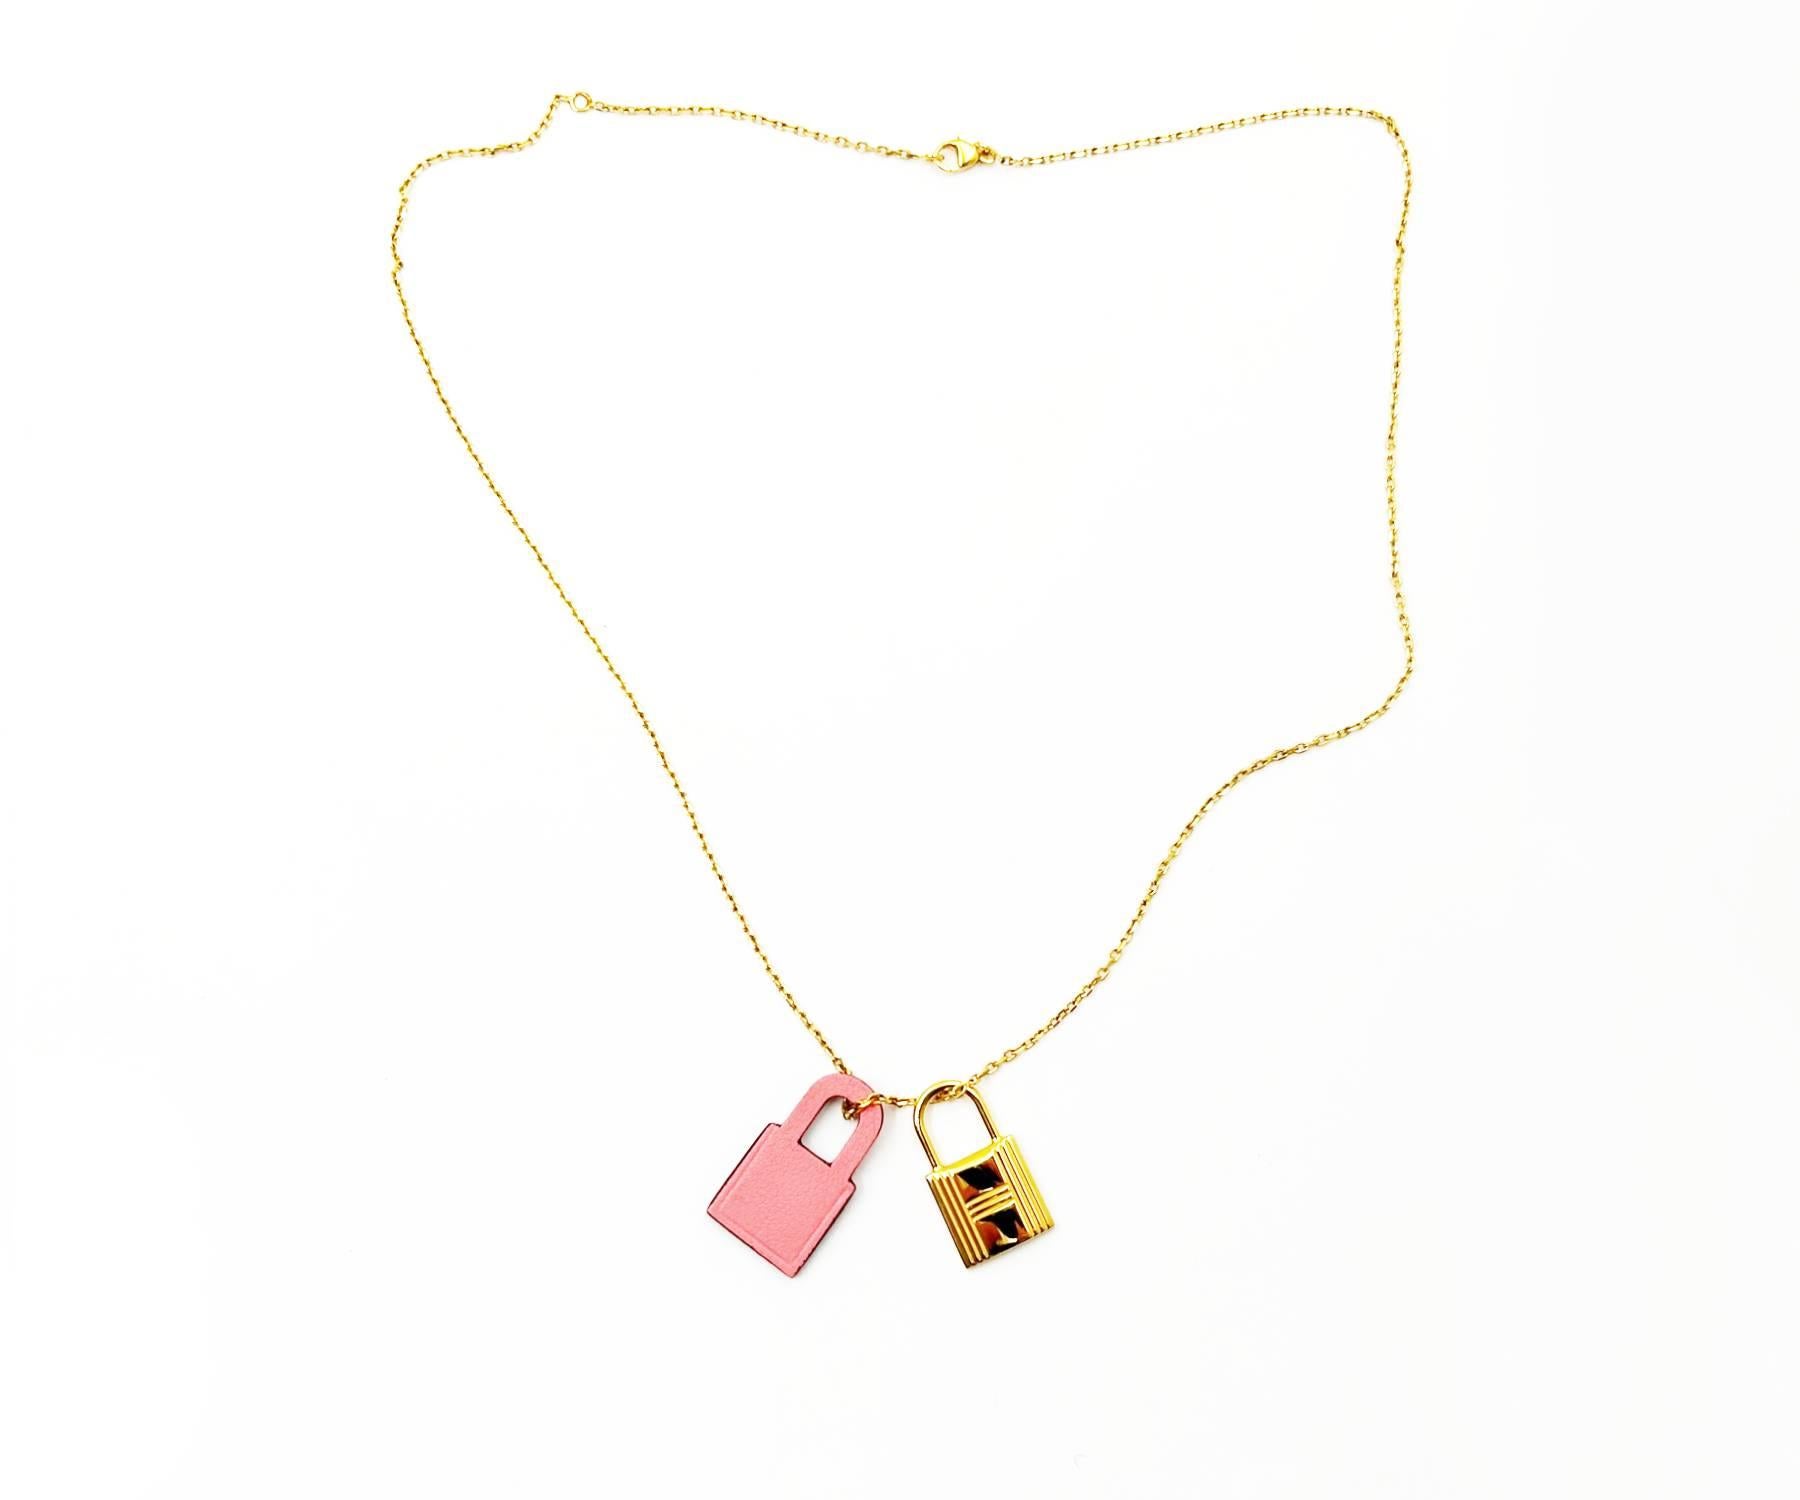 Hermes Gold Pink O Kelly Necklace

* Marked Hermes 
*D stamp/ 2019
* Made in France
*Comes with the original box, pouch and cards.

-It's approximately 19